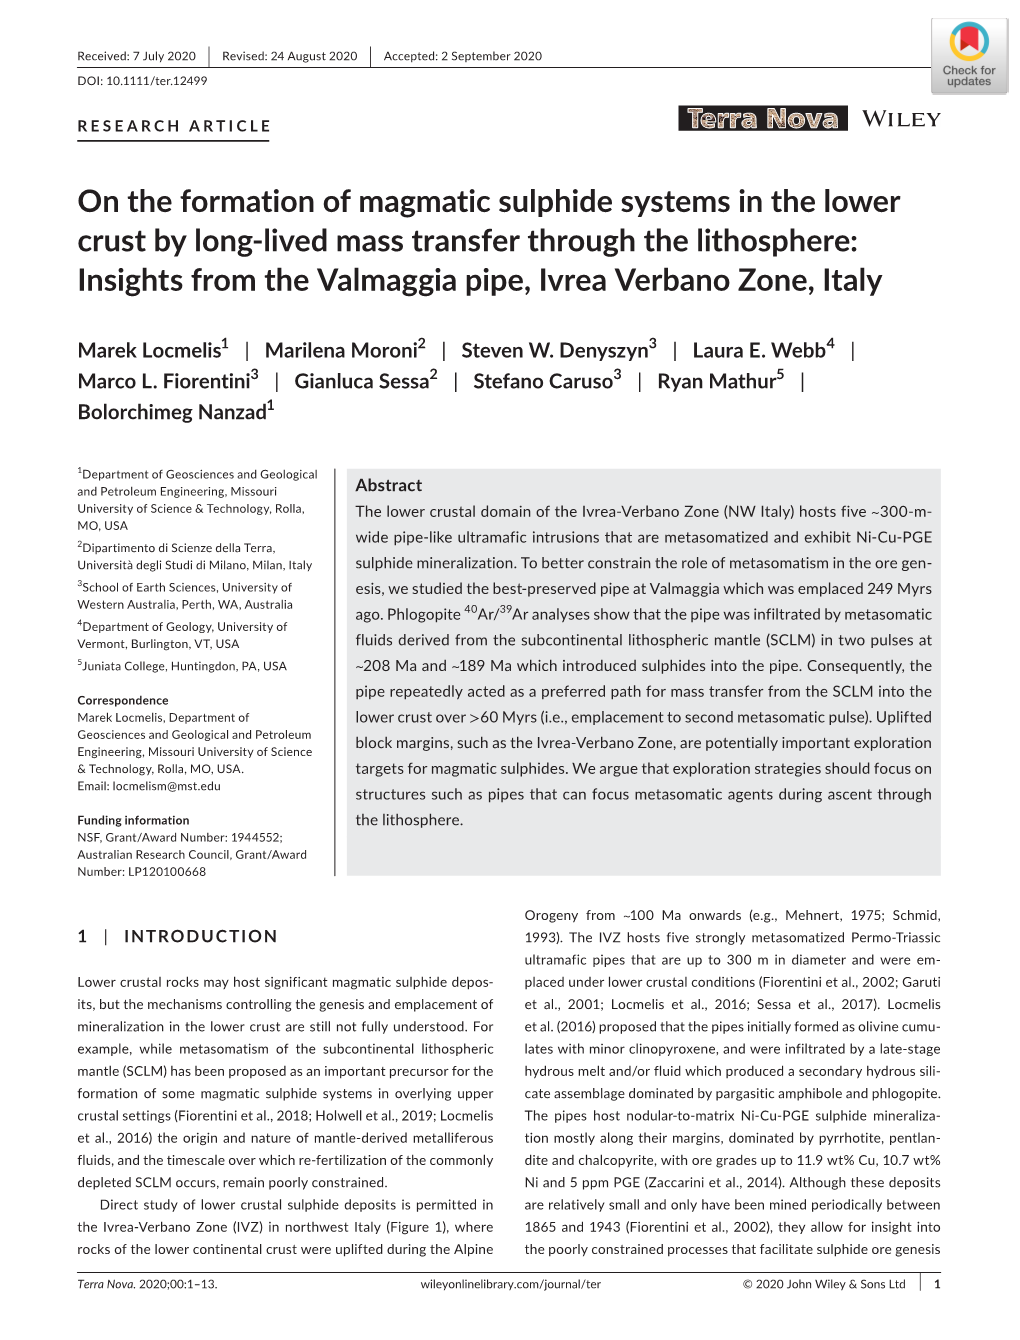 On the Formation of Magmatic Sulphide Systems in the Lower Crust by Long‐Lived Mass Transfer Through the Lithosphere